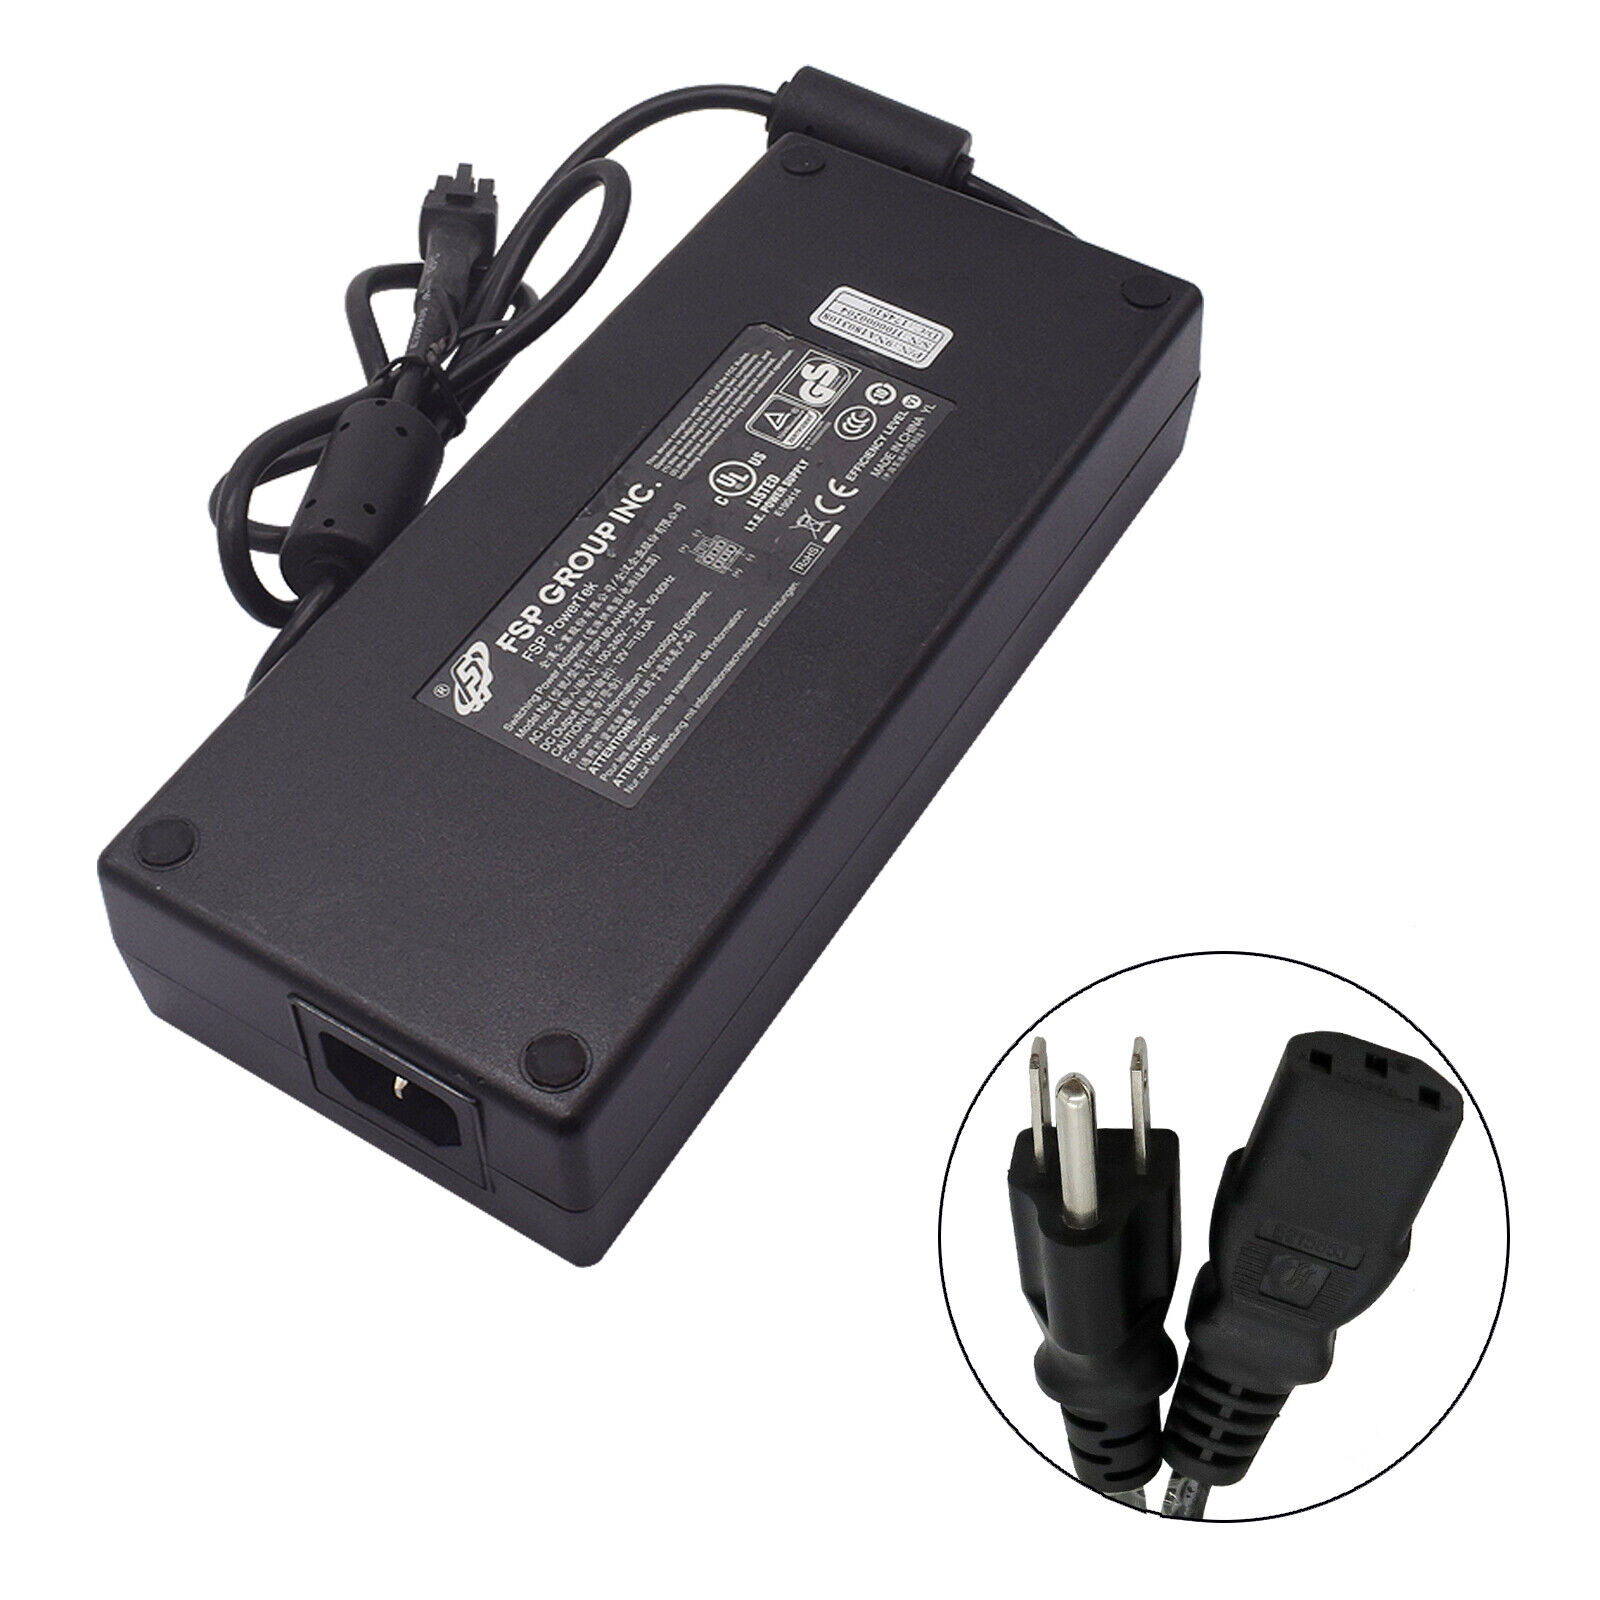 *Brand NEW*FSP FSP180-AHAN1 180W 12V 15A 6-PIN Switching Power Supply AC Adapter